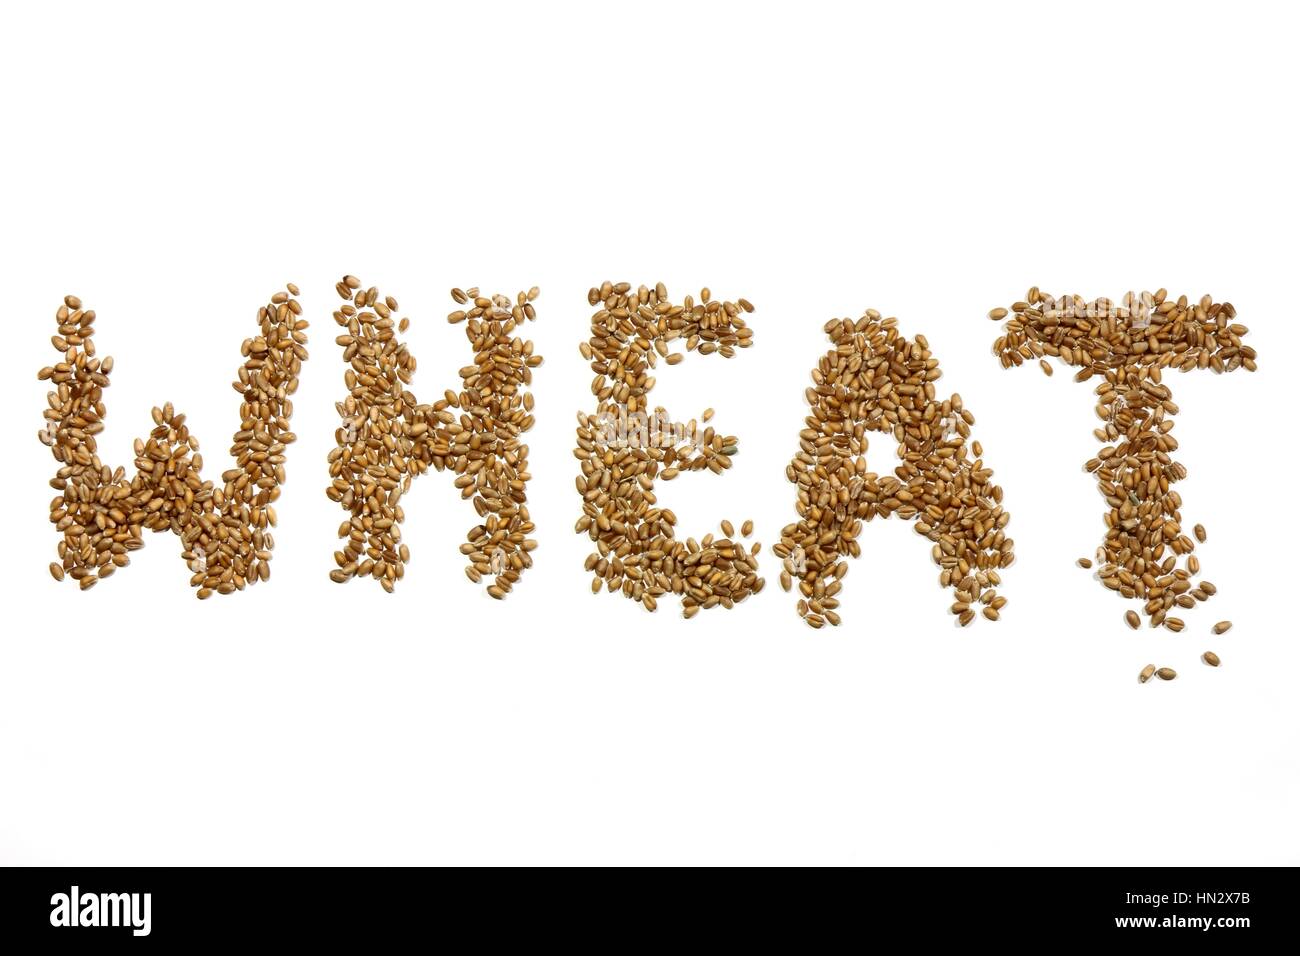 WHEAT written with wheat grains isolated on white background Stock Photo